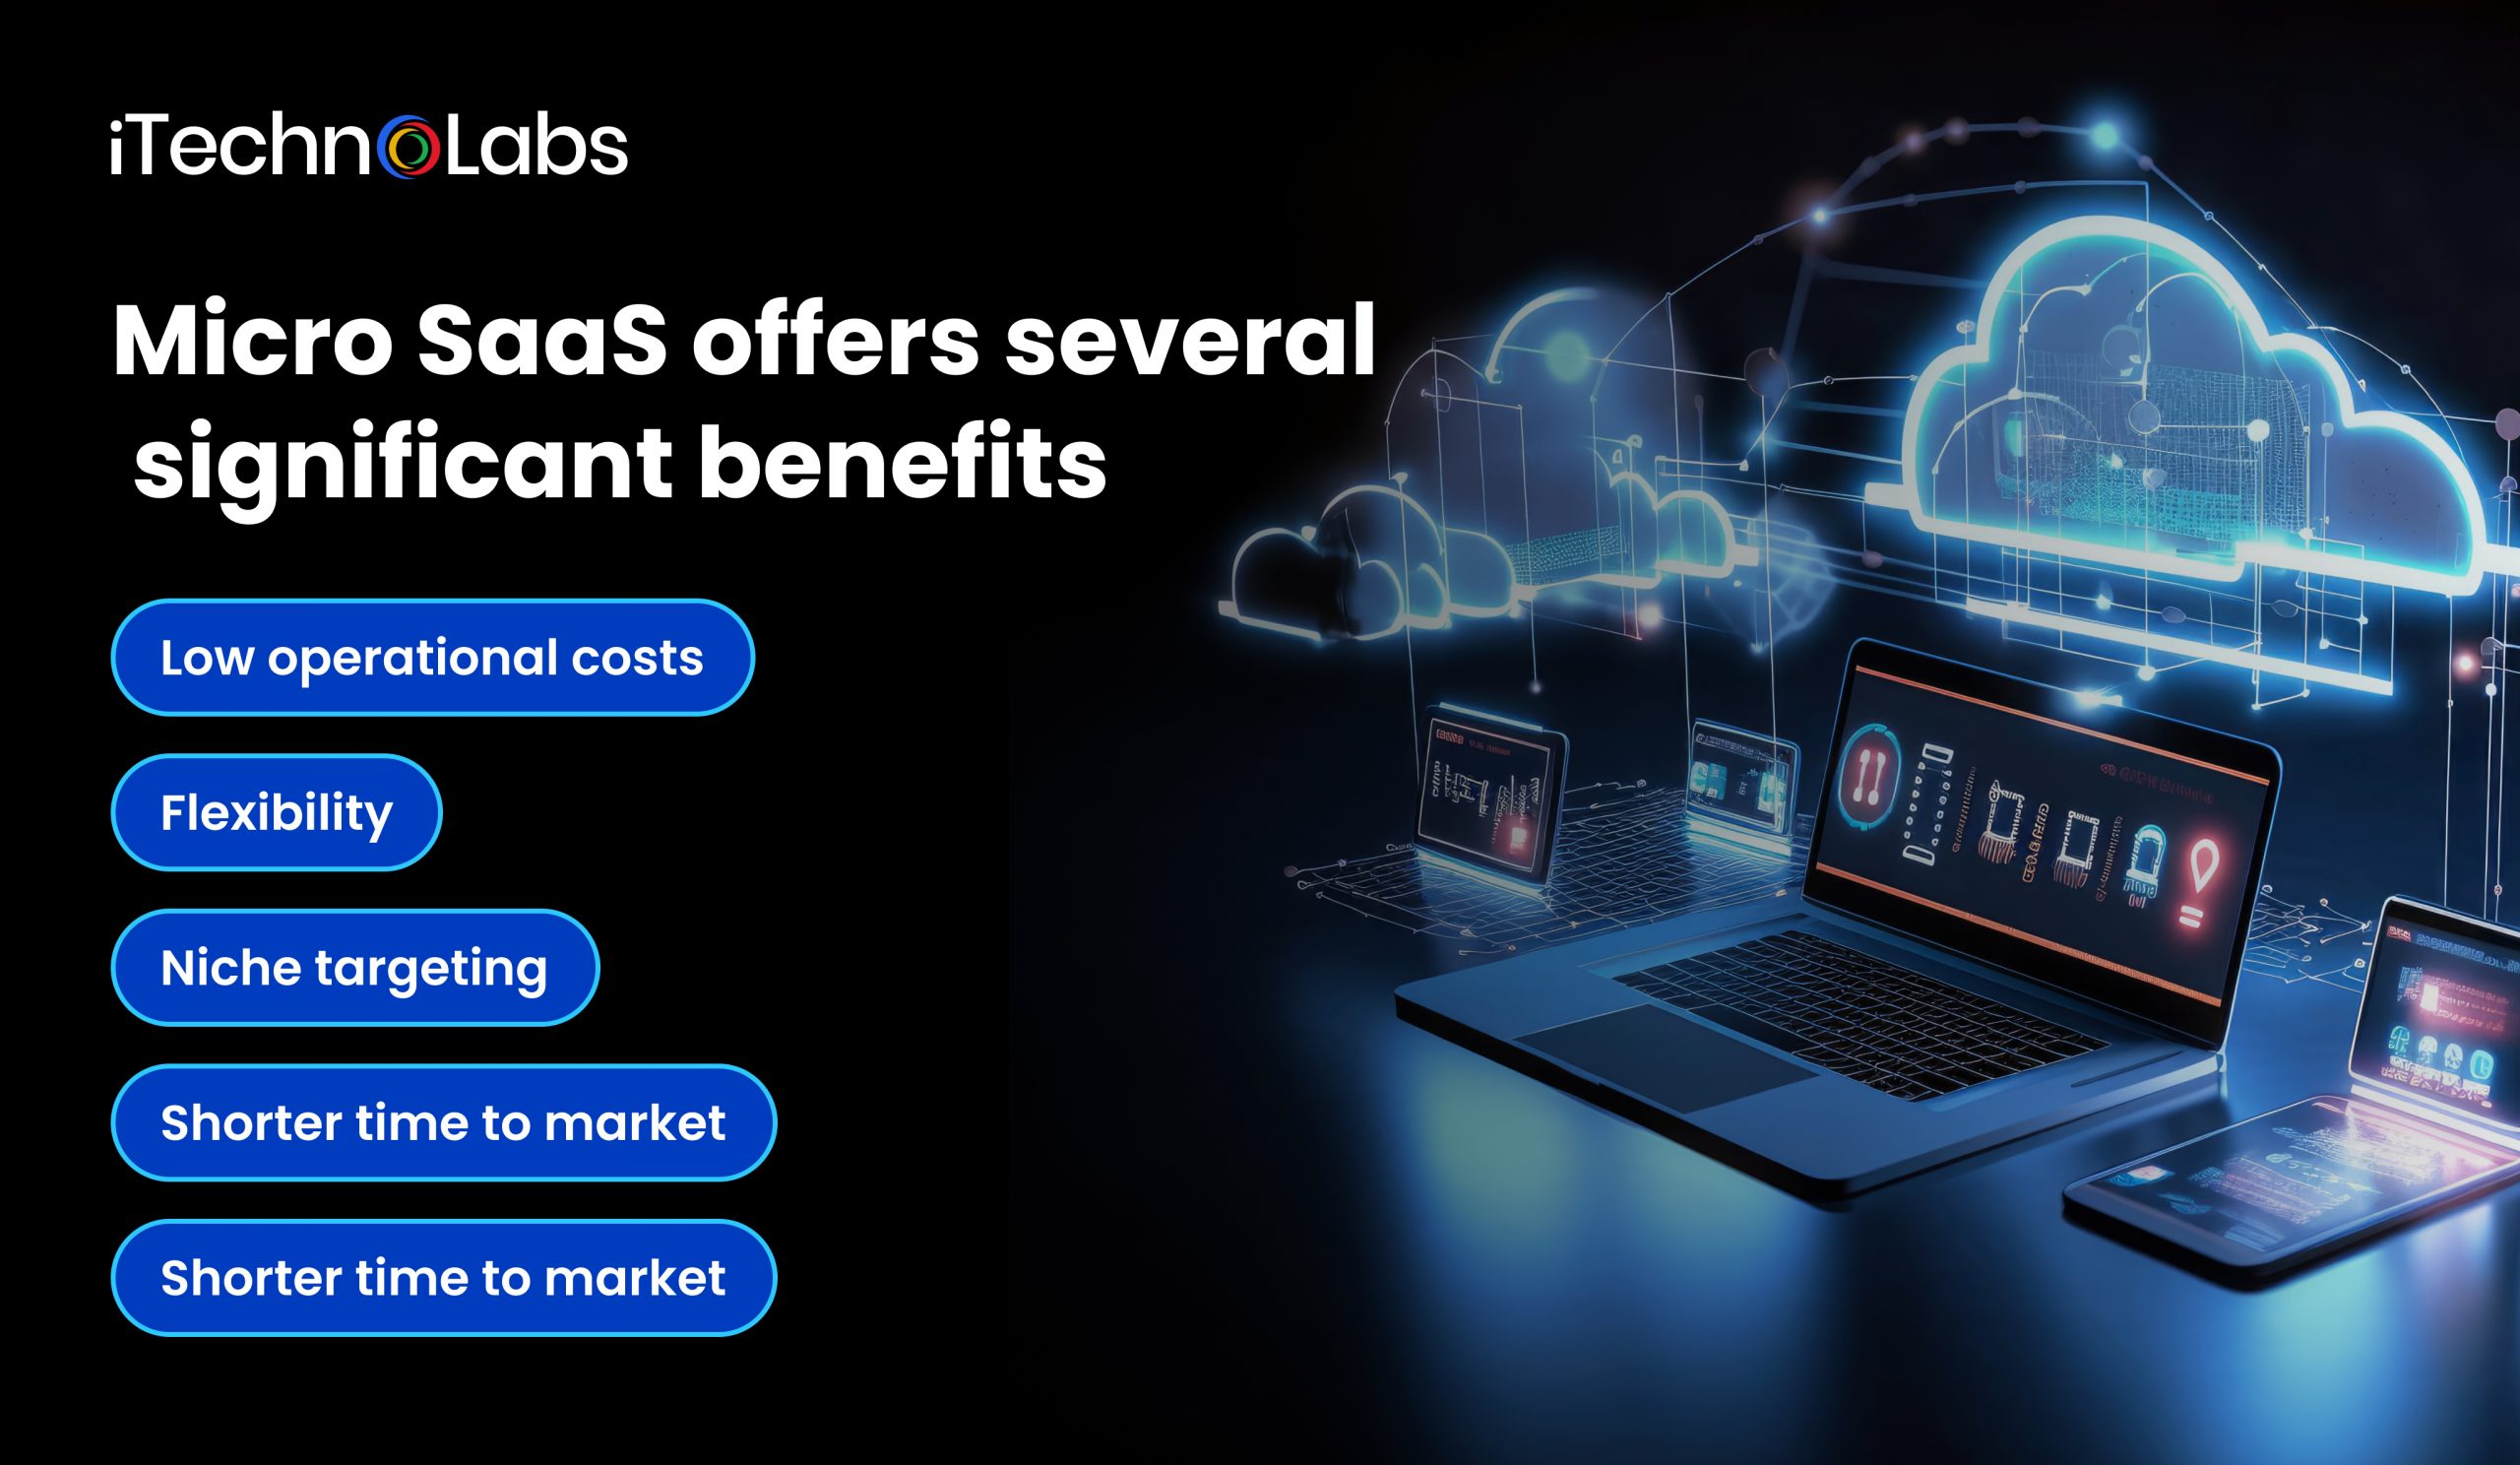 Micro SaaS offers several significant benefits